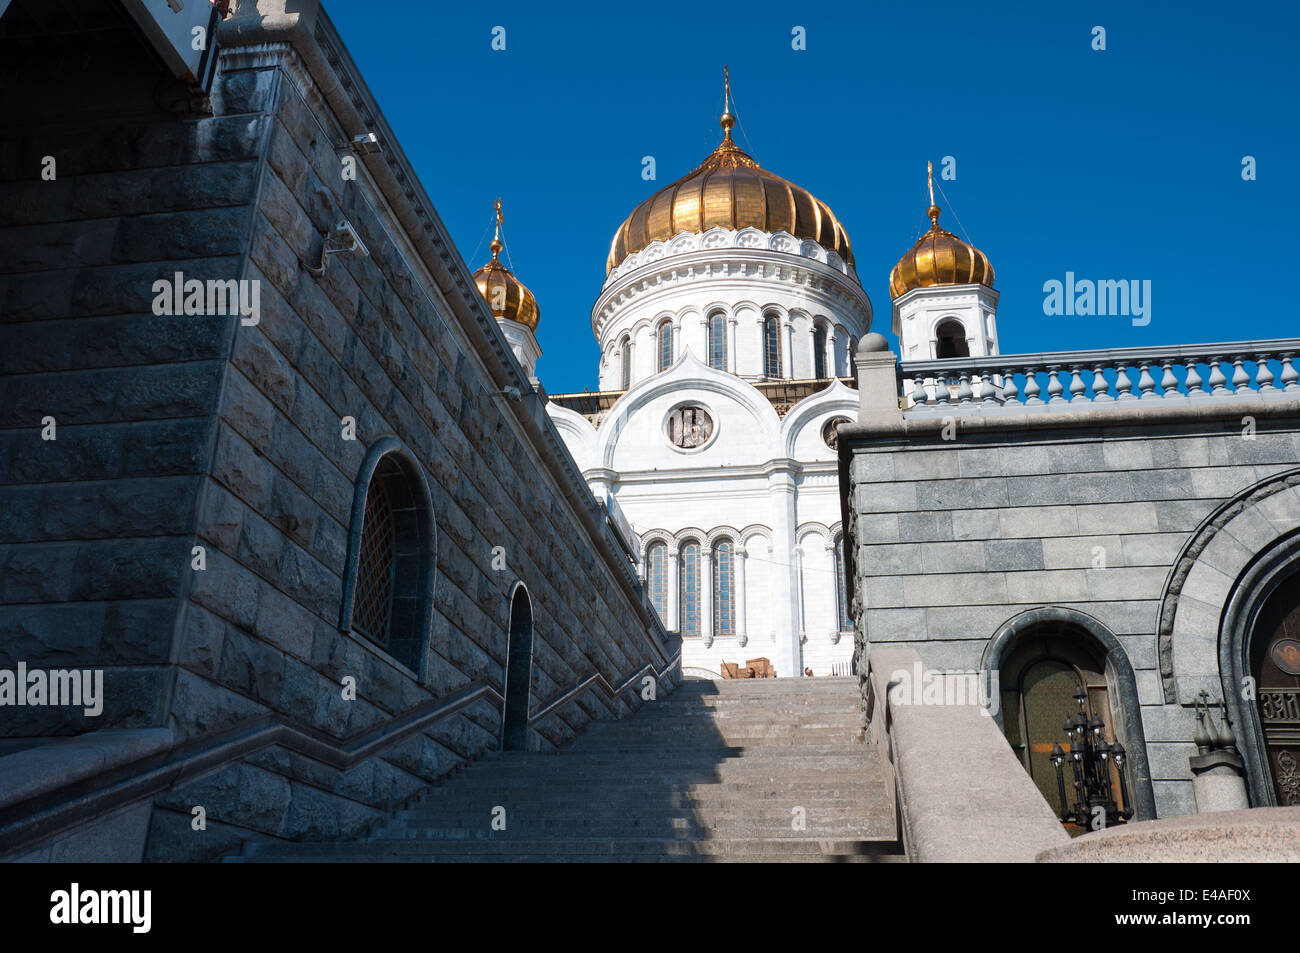 moscow Russia Orthodox Christianity church religion faith architecture Russian town city cathedral white dome gold majestic maje Stock Photo